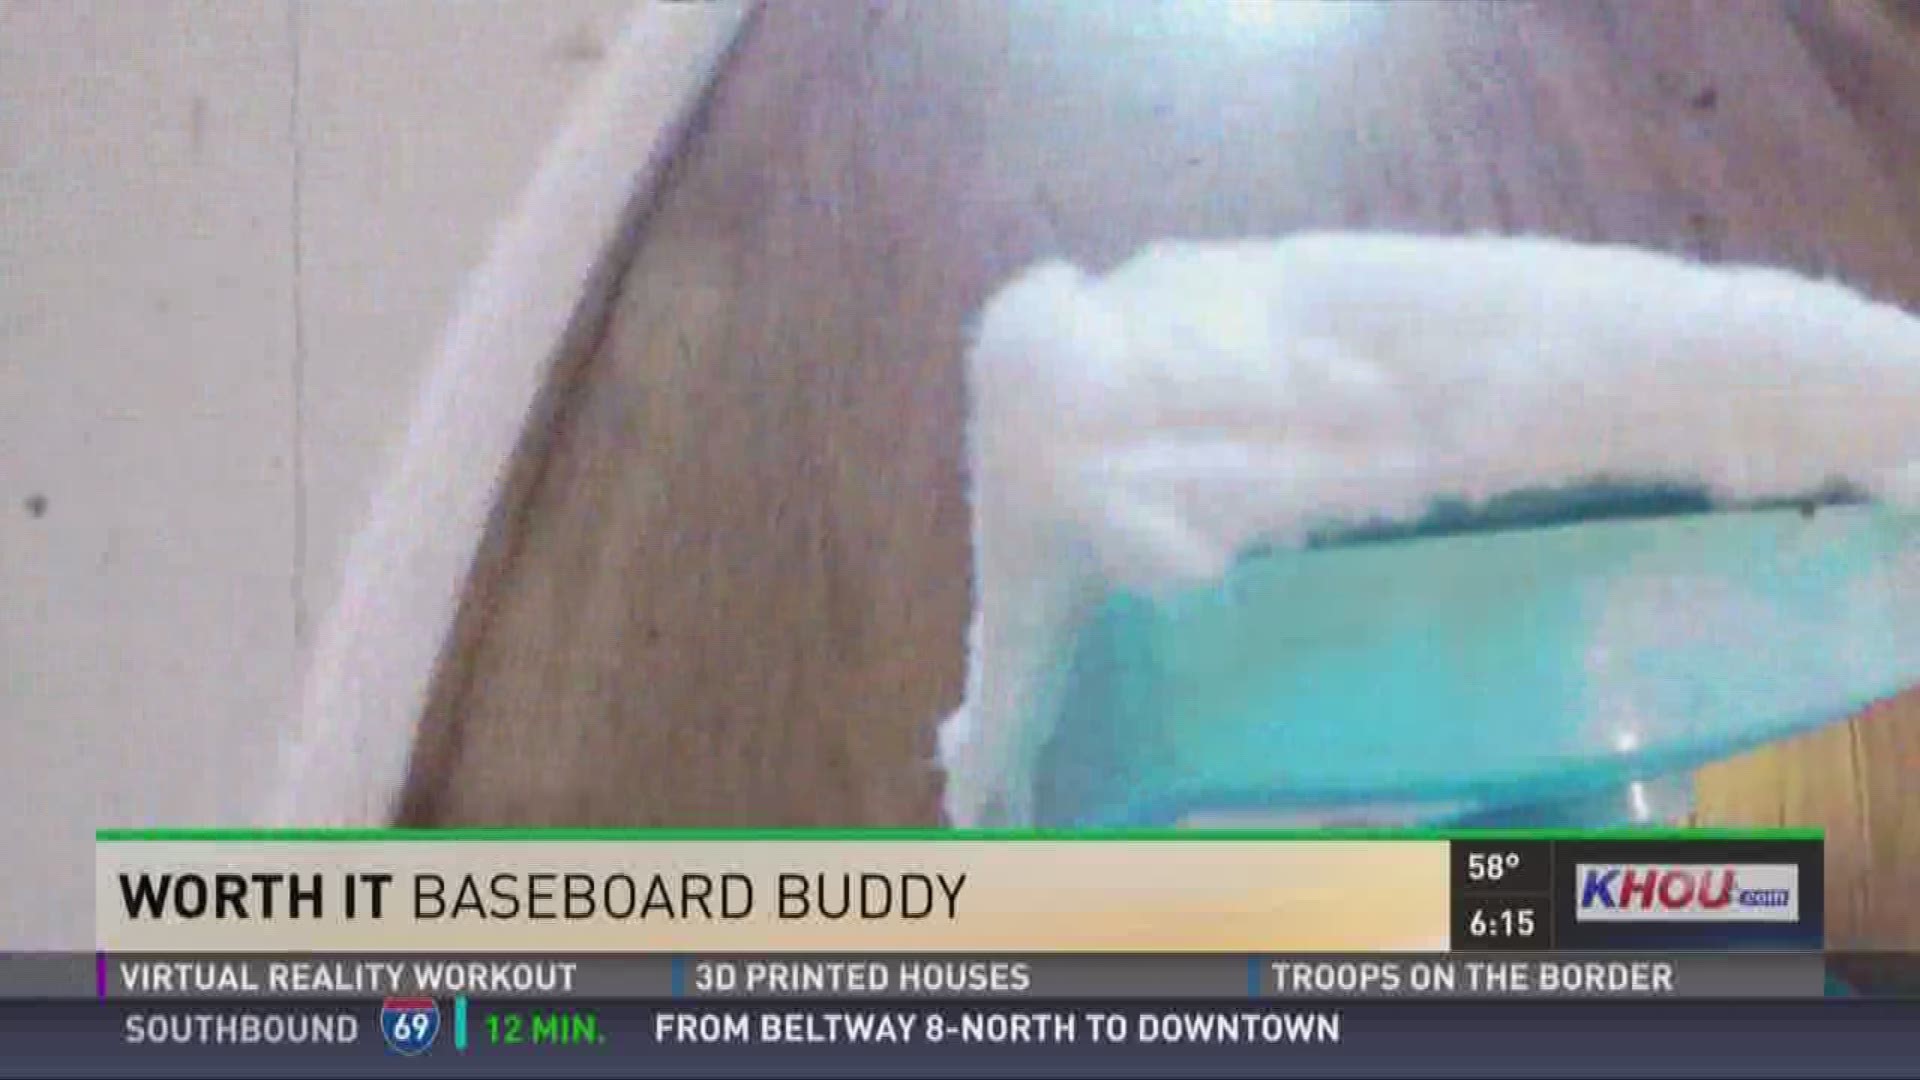 If cleaning baseboards feels like a job, there's a gadget that could make it easier. It's called Baseboard Buddy.